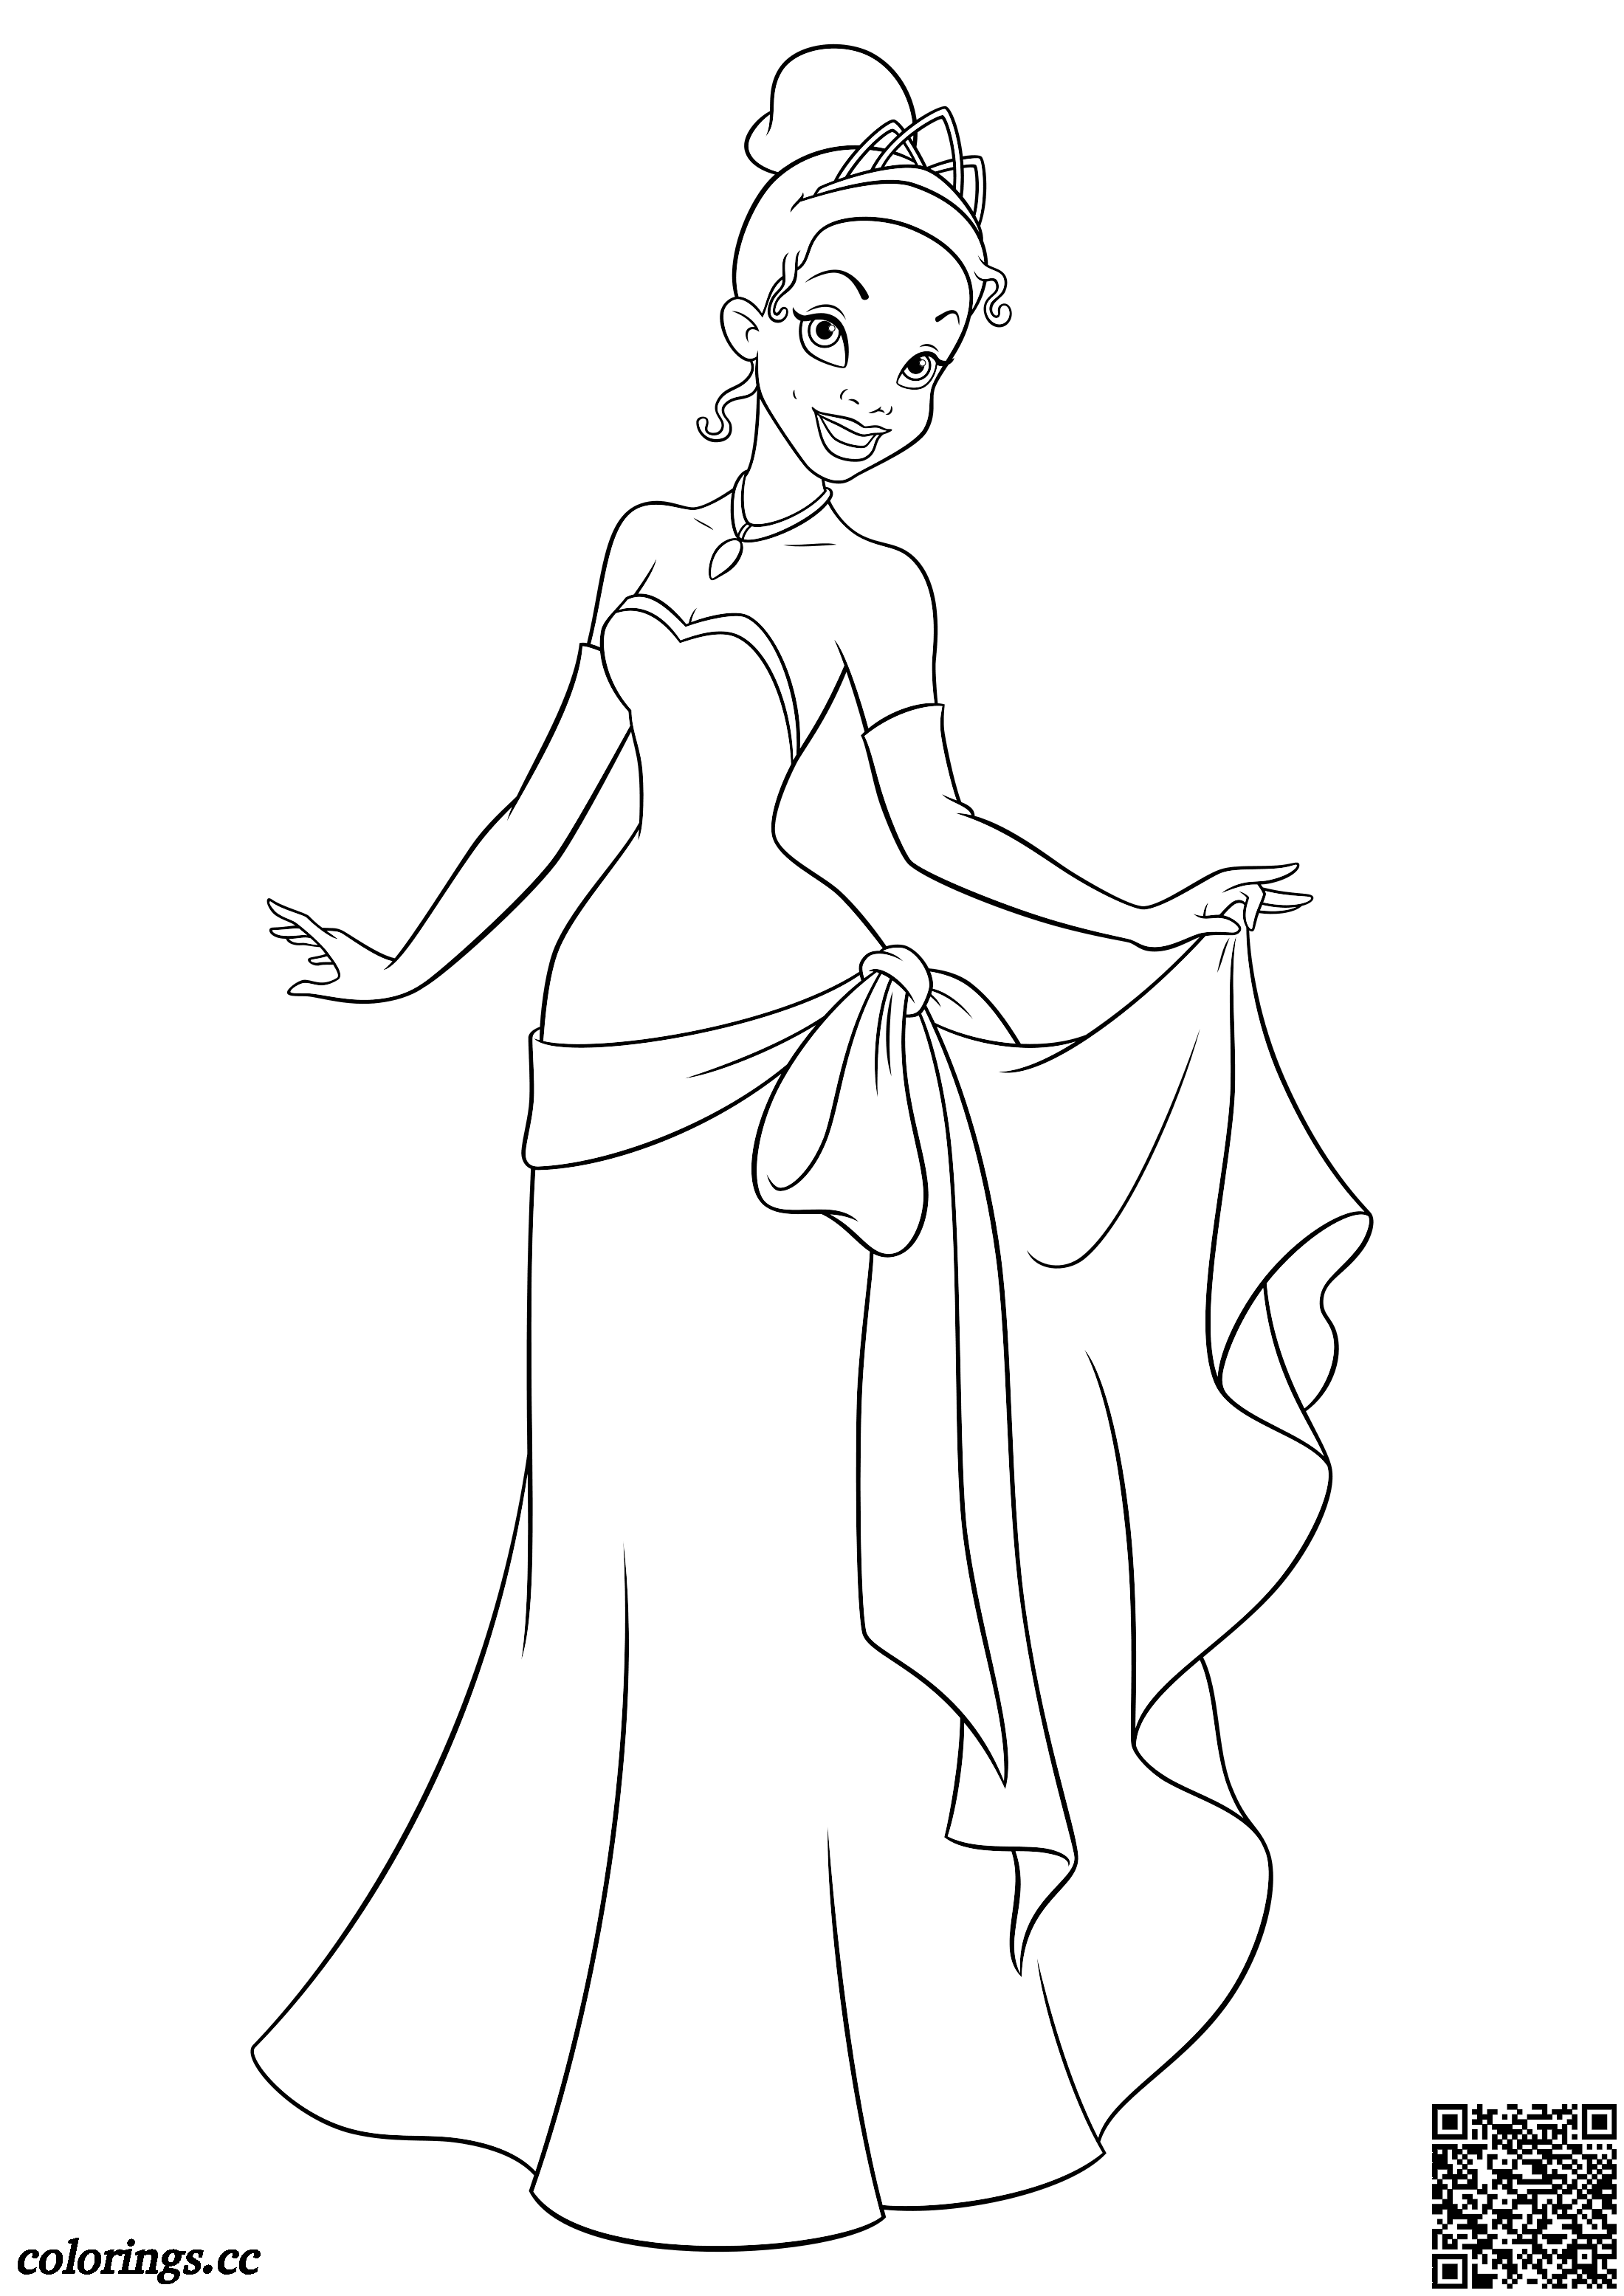 Tiana in an evening dress coloring pages, Disney princesses coloring ...